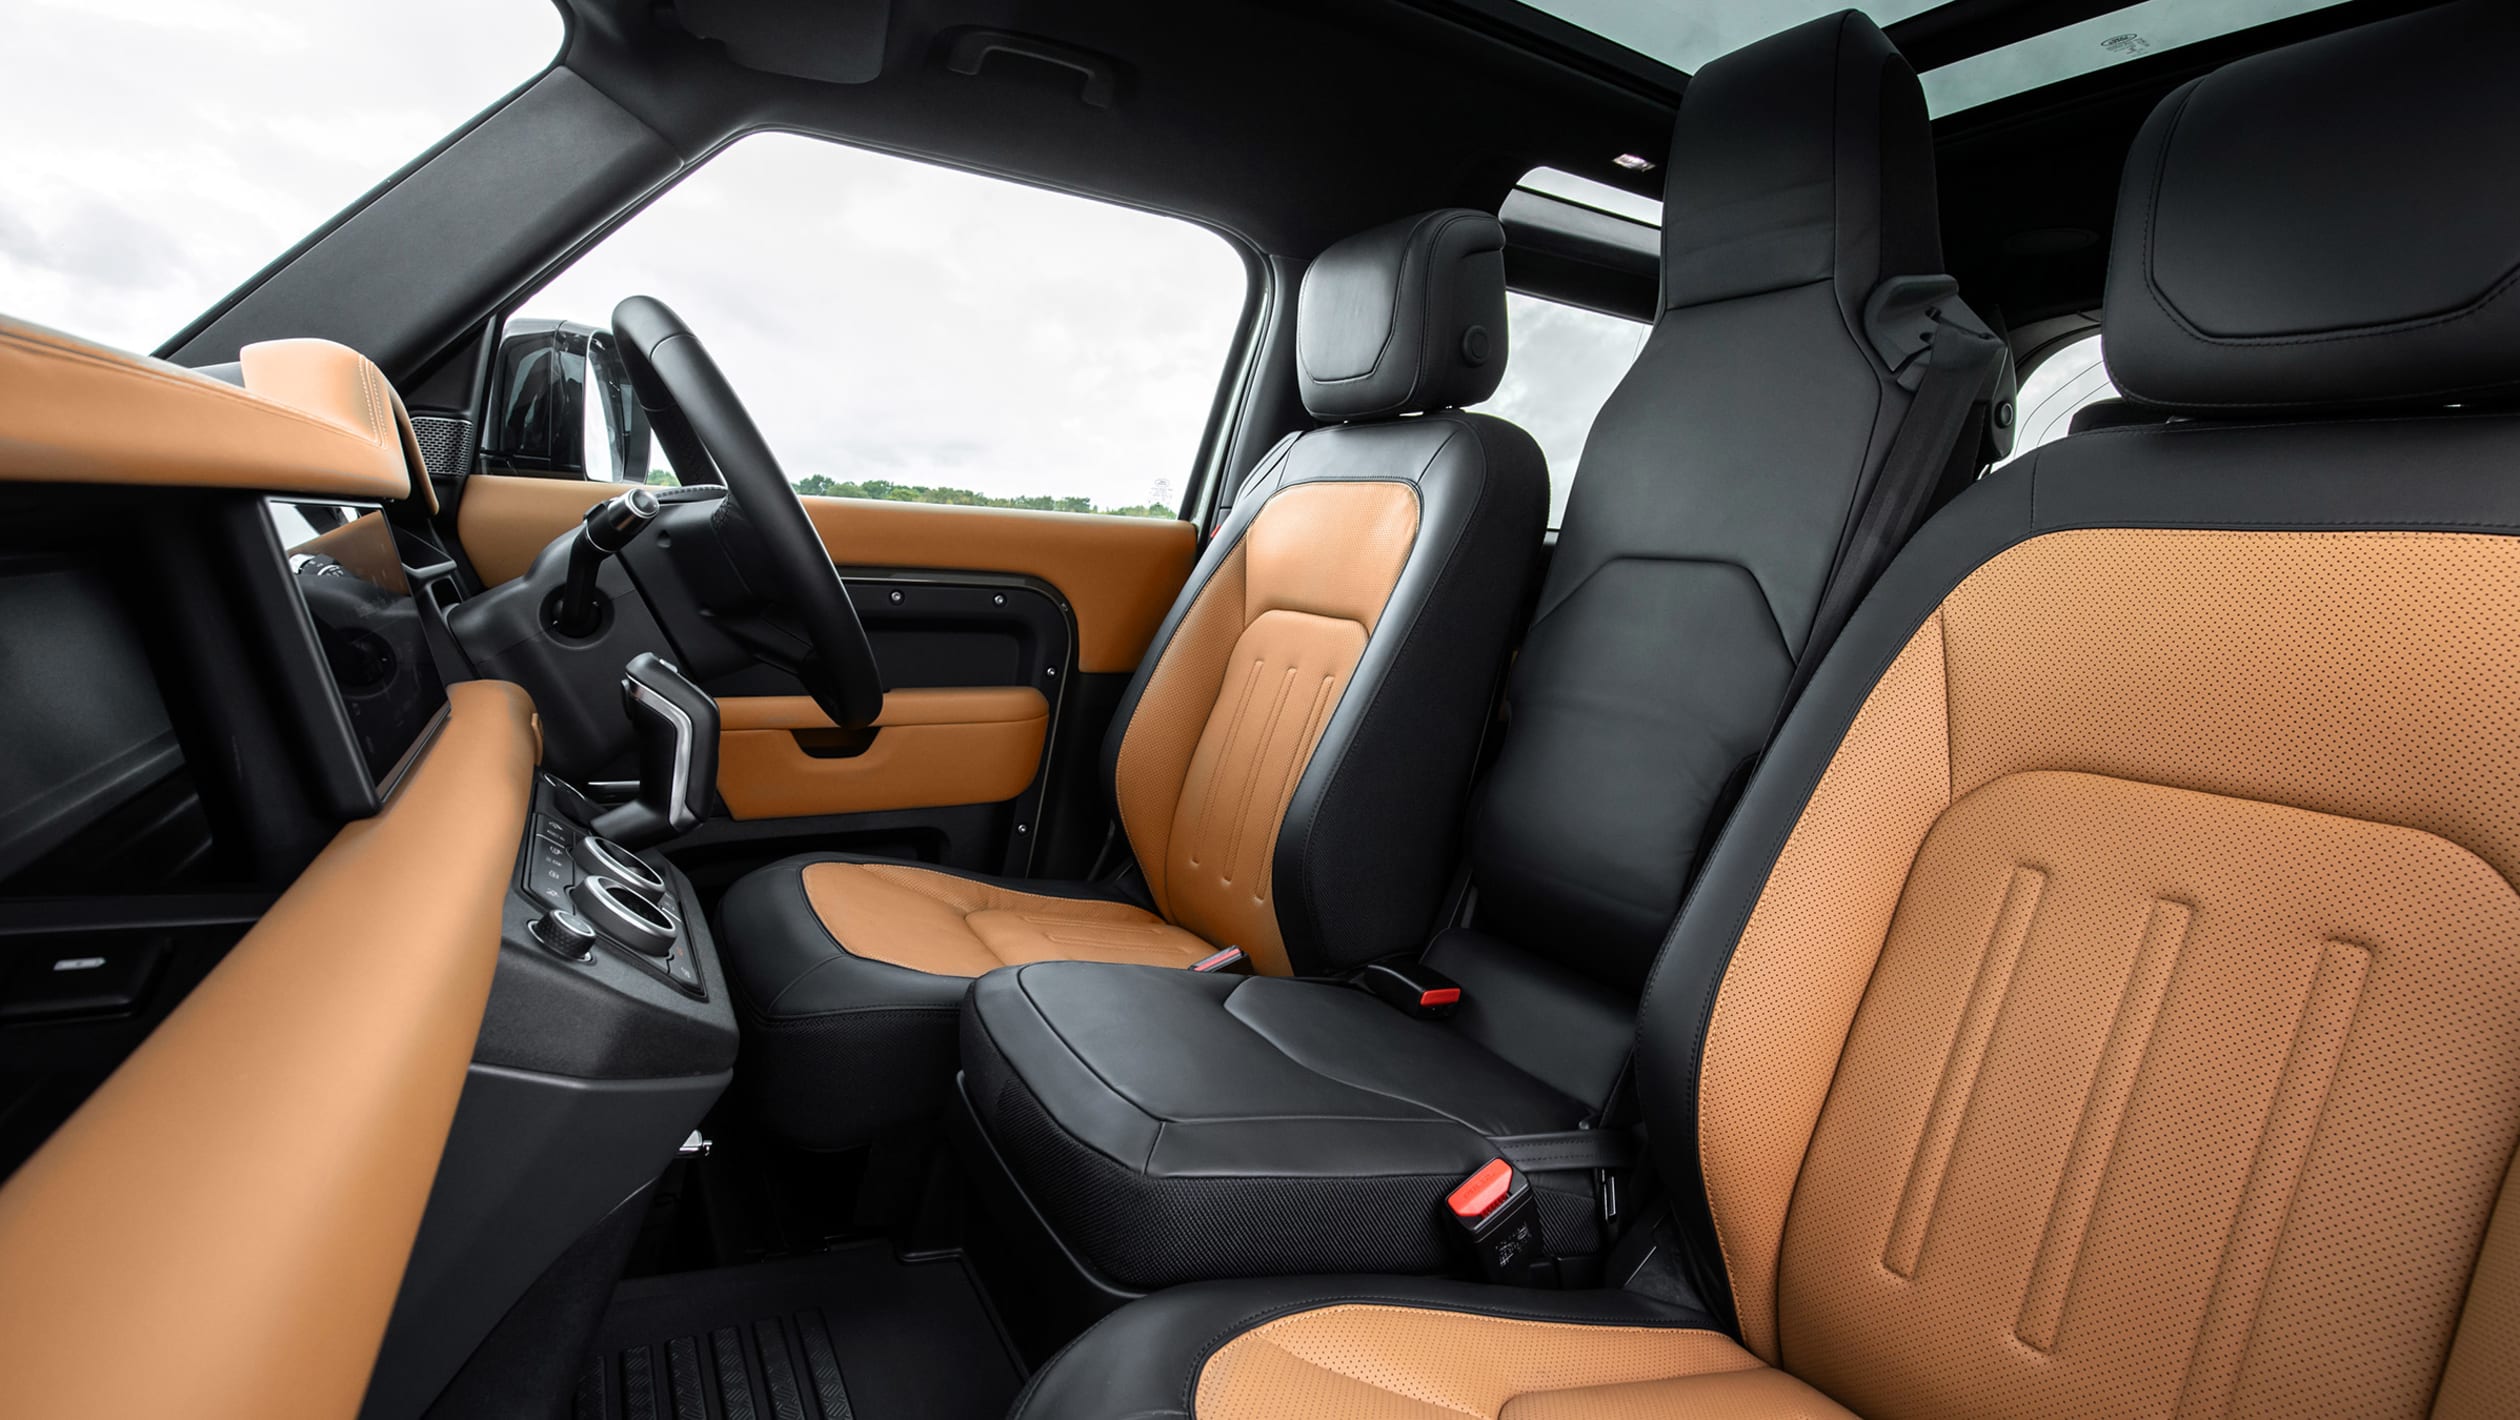  Which Suv Has The Widest Front Seats